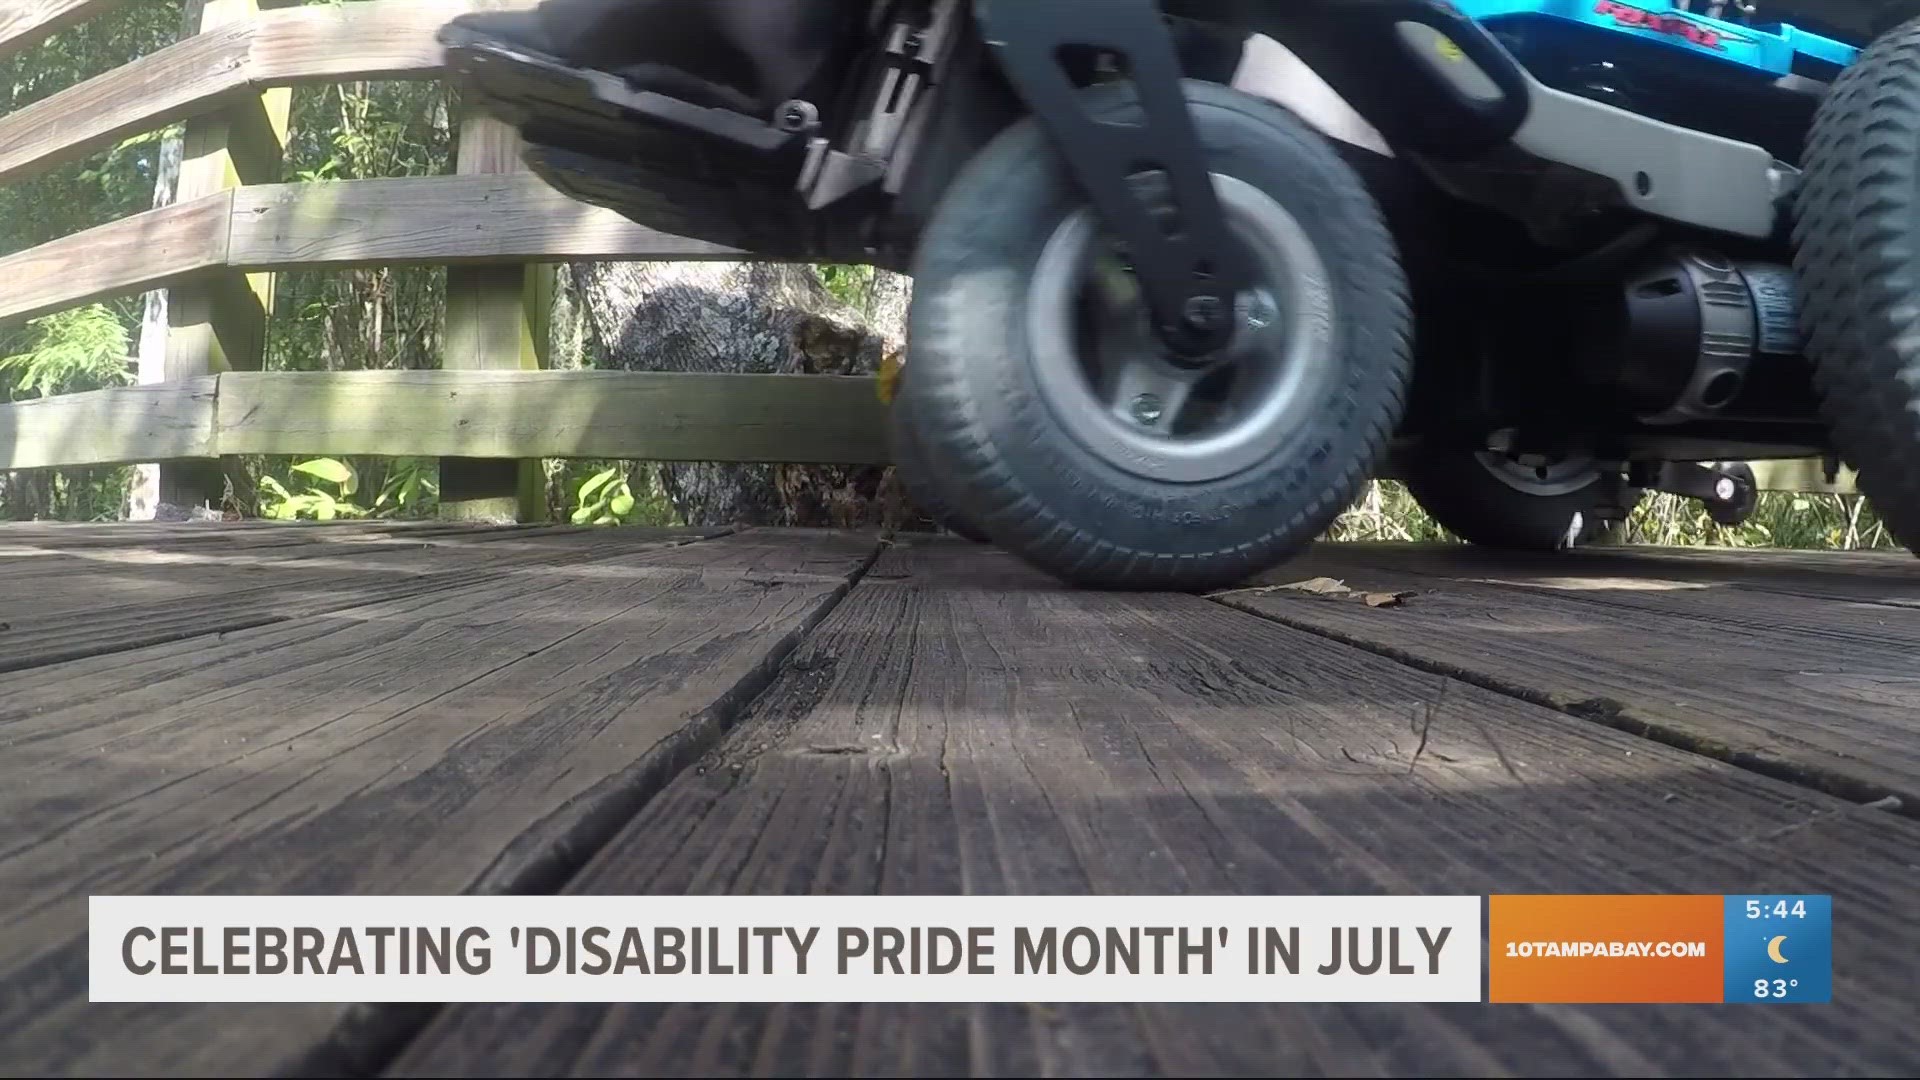 In July 1990, the Americans With Disabilities Act was signed and Disability Pride Month was born.